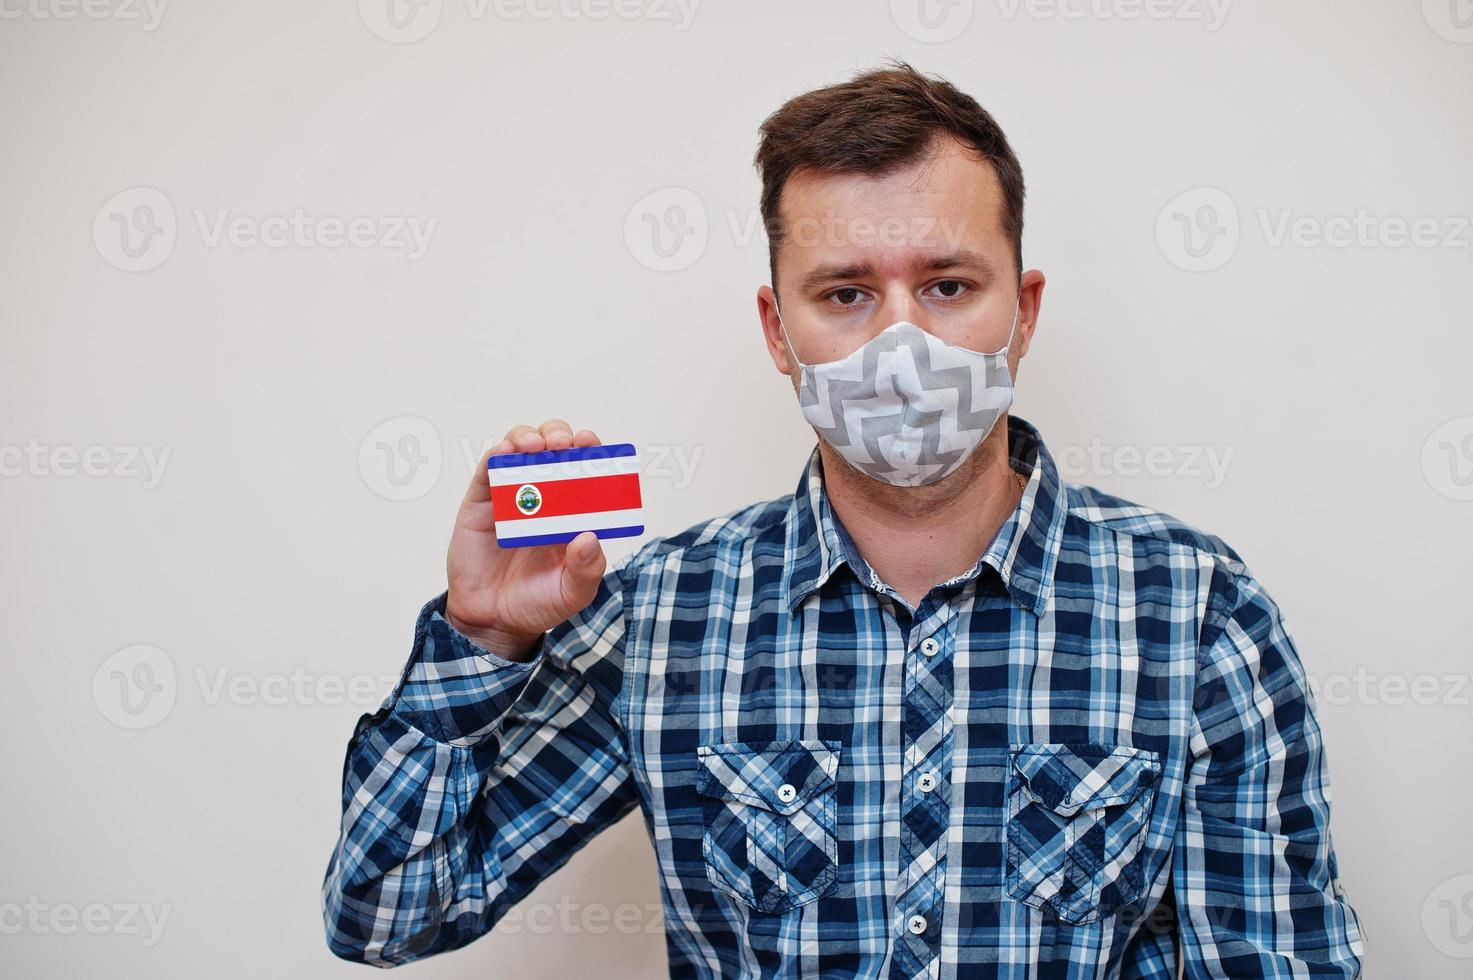 Man in checkered shirt show Costa Rica flag card in hand, wear protect mask isolated on white background. American countries Coronavirus concept. photo